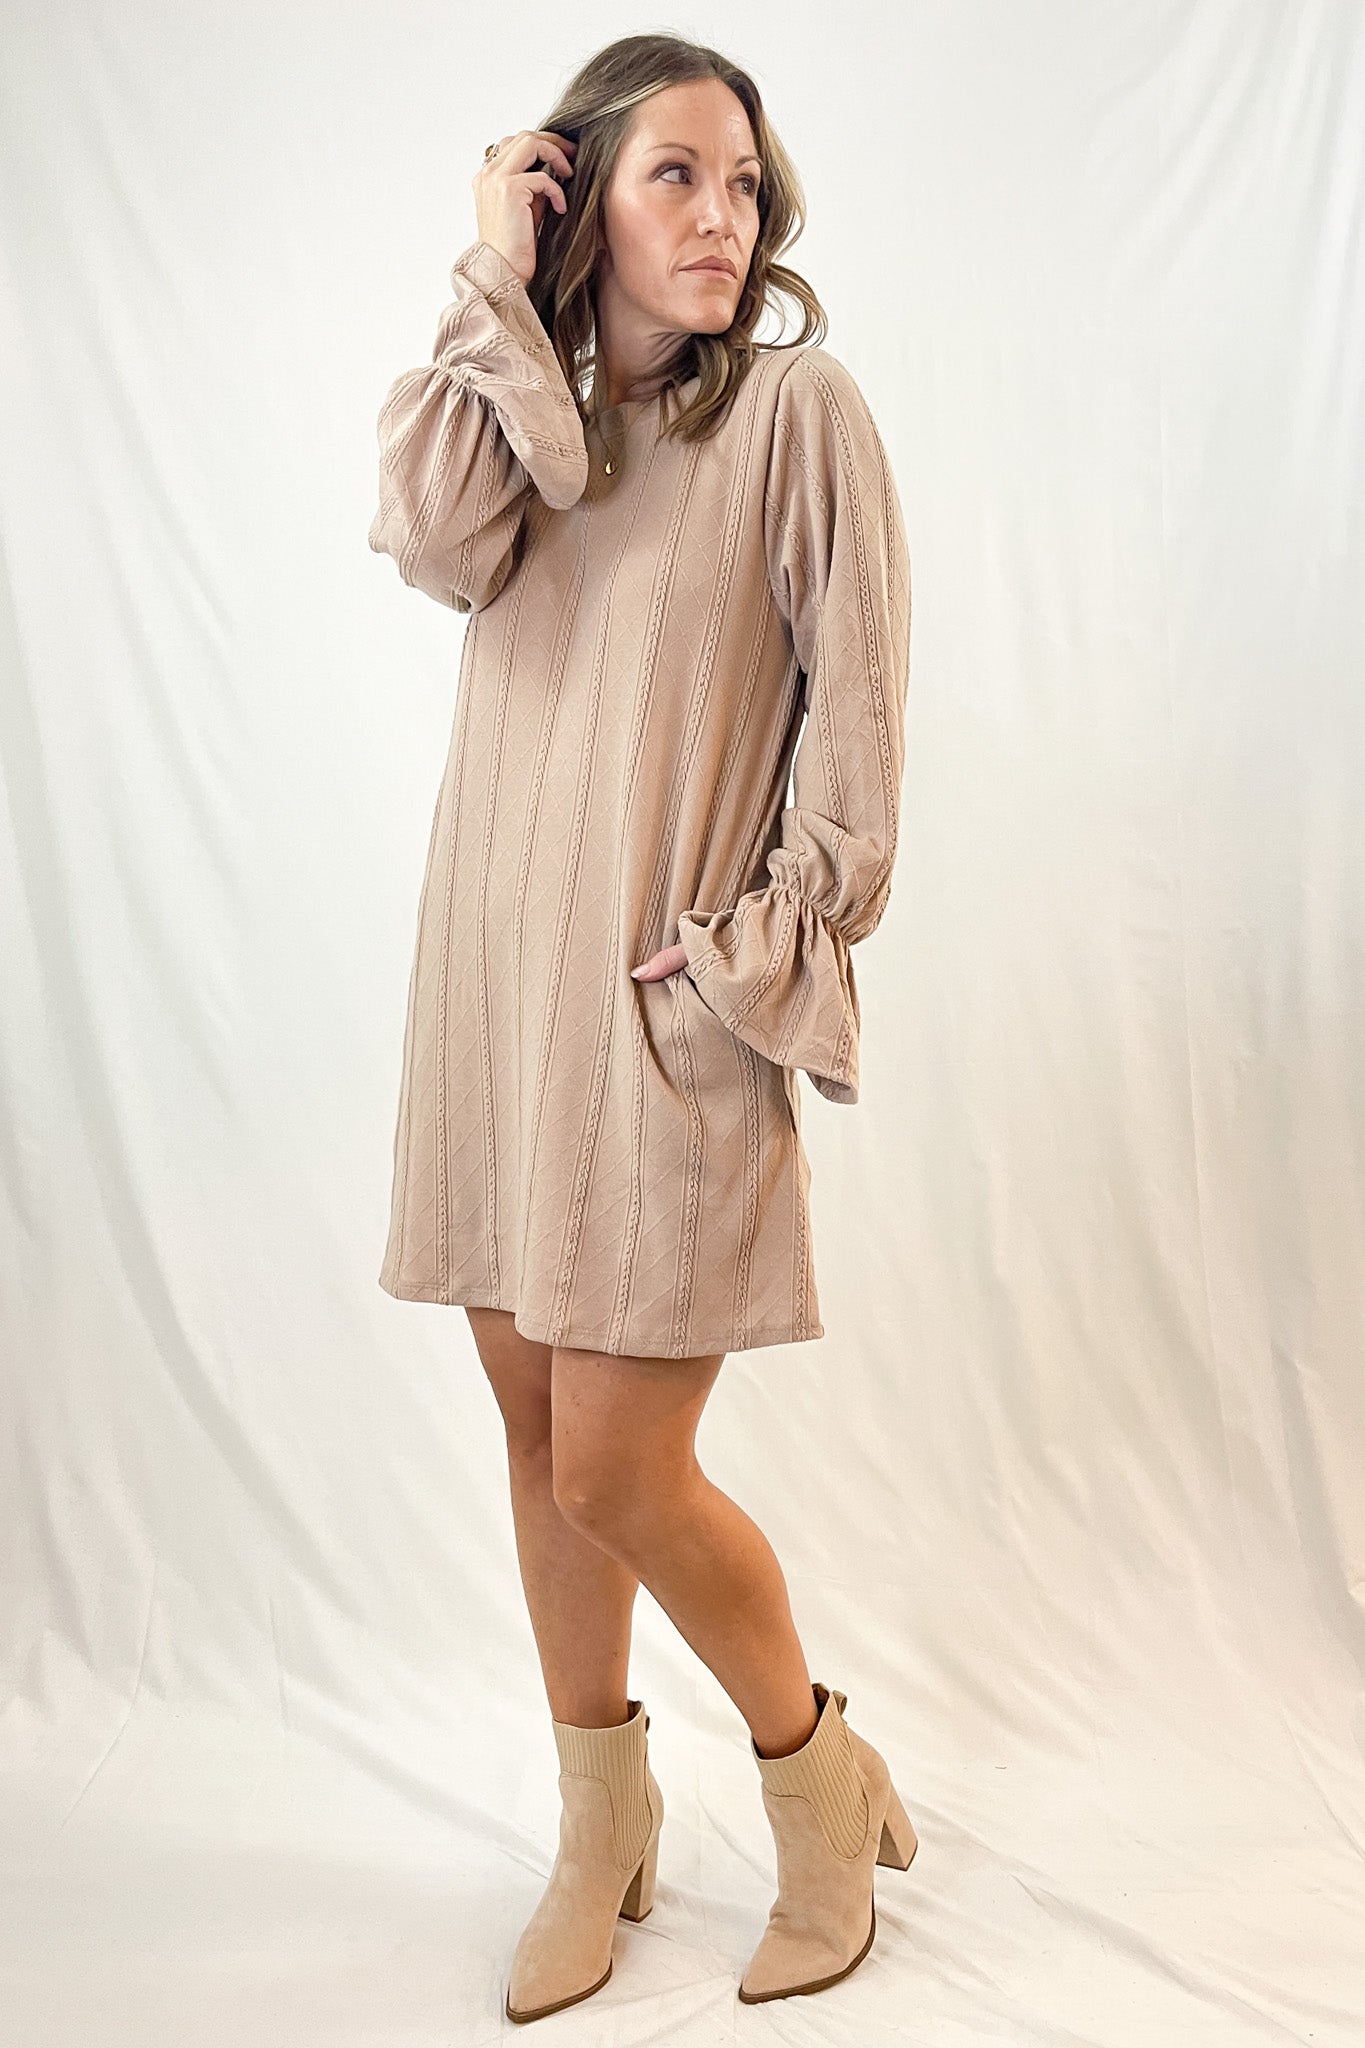 Textured Knit Bell Sleeve Dress | 5 Colors - All Sales Final